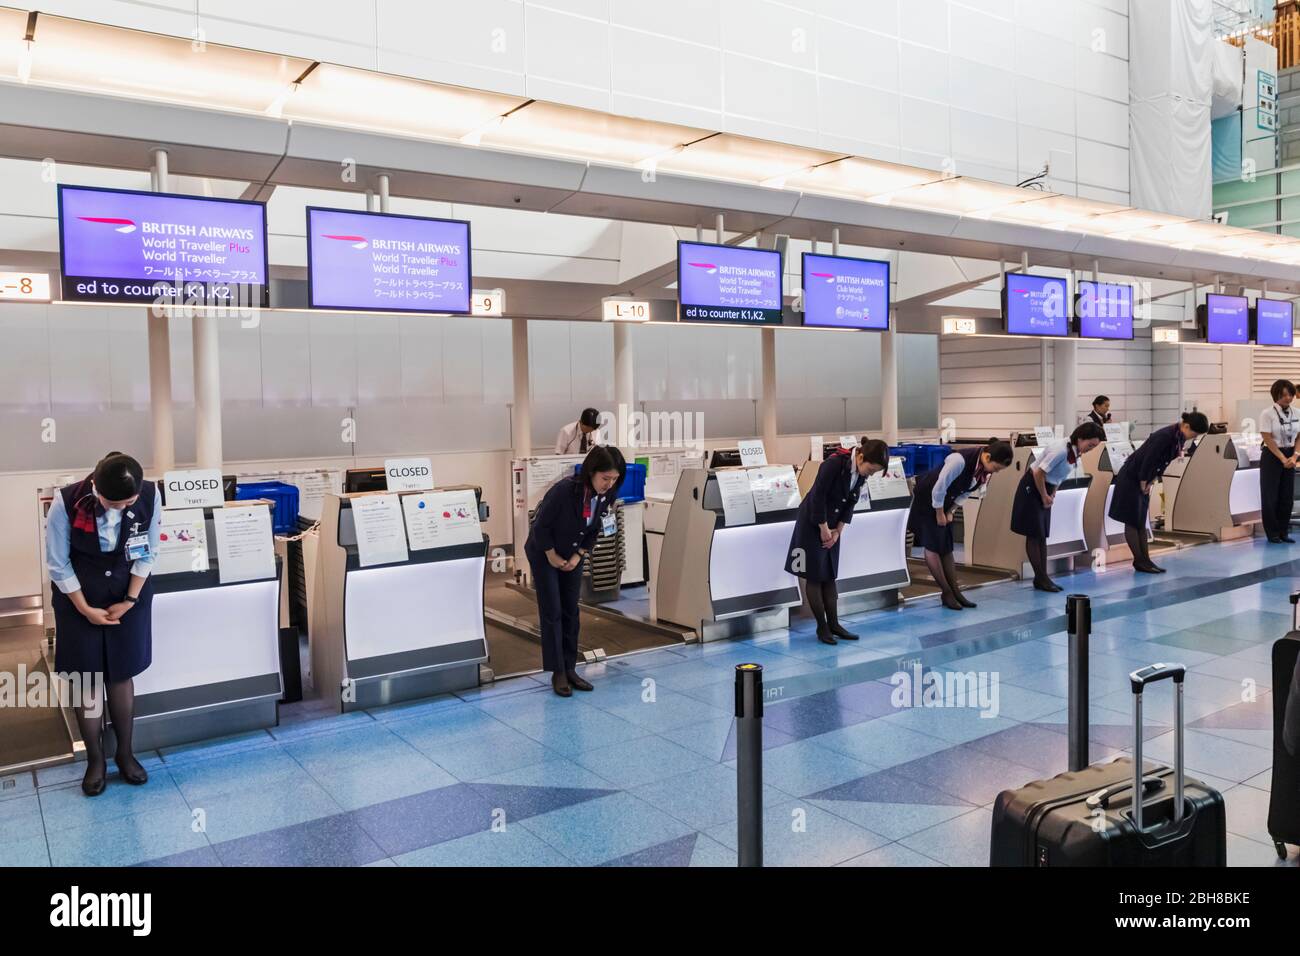 Japan, Honshu, Tokyo, Haneda Airport, International Terminal, Departure Area, British Airways Staff Bowing to Customers Prior to Opening Check-in Counters Stock Photo